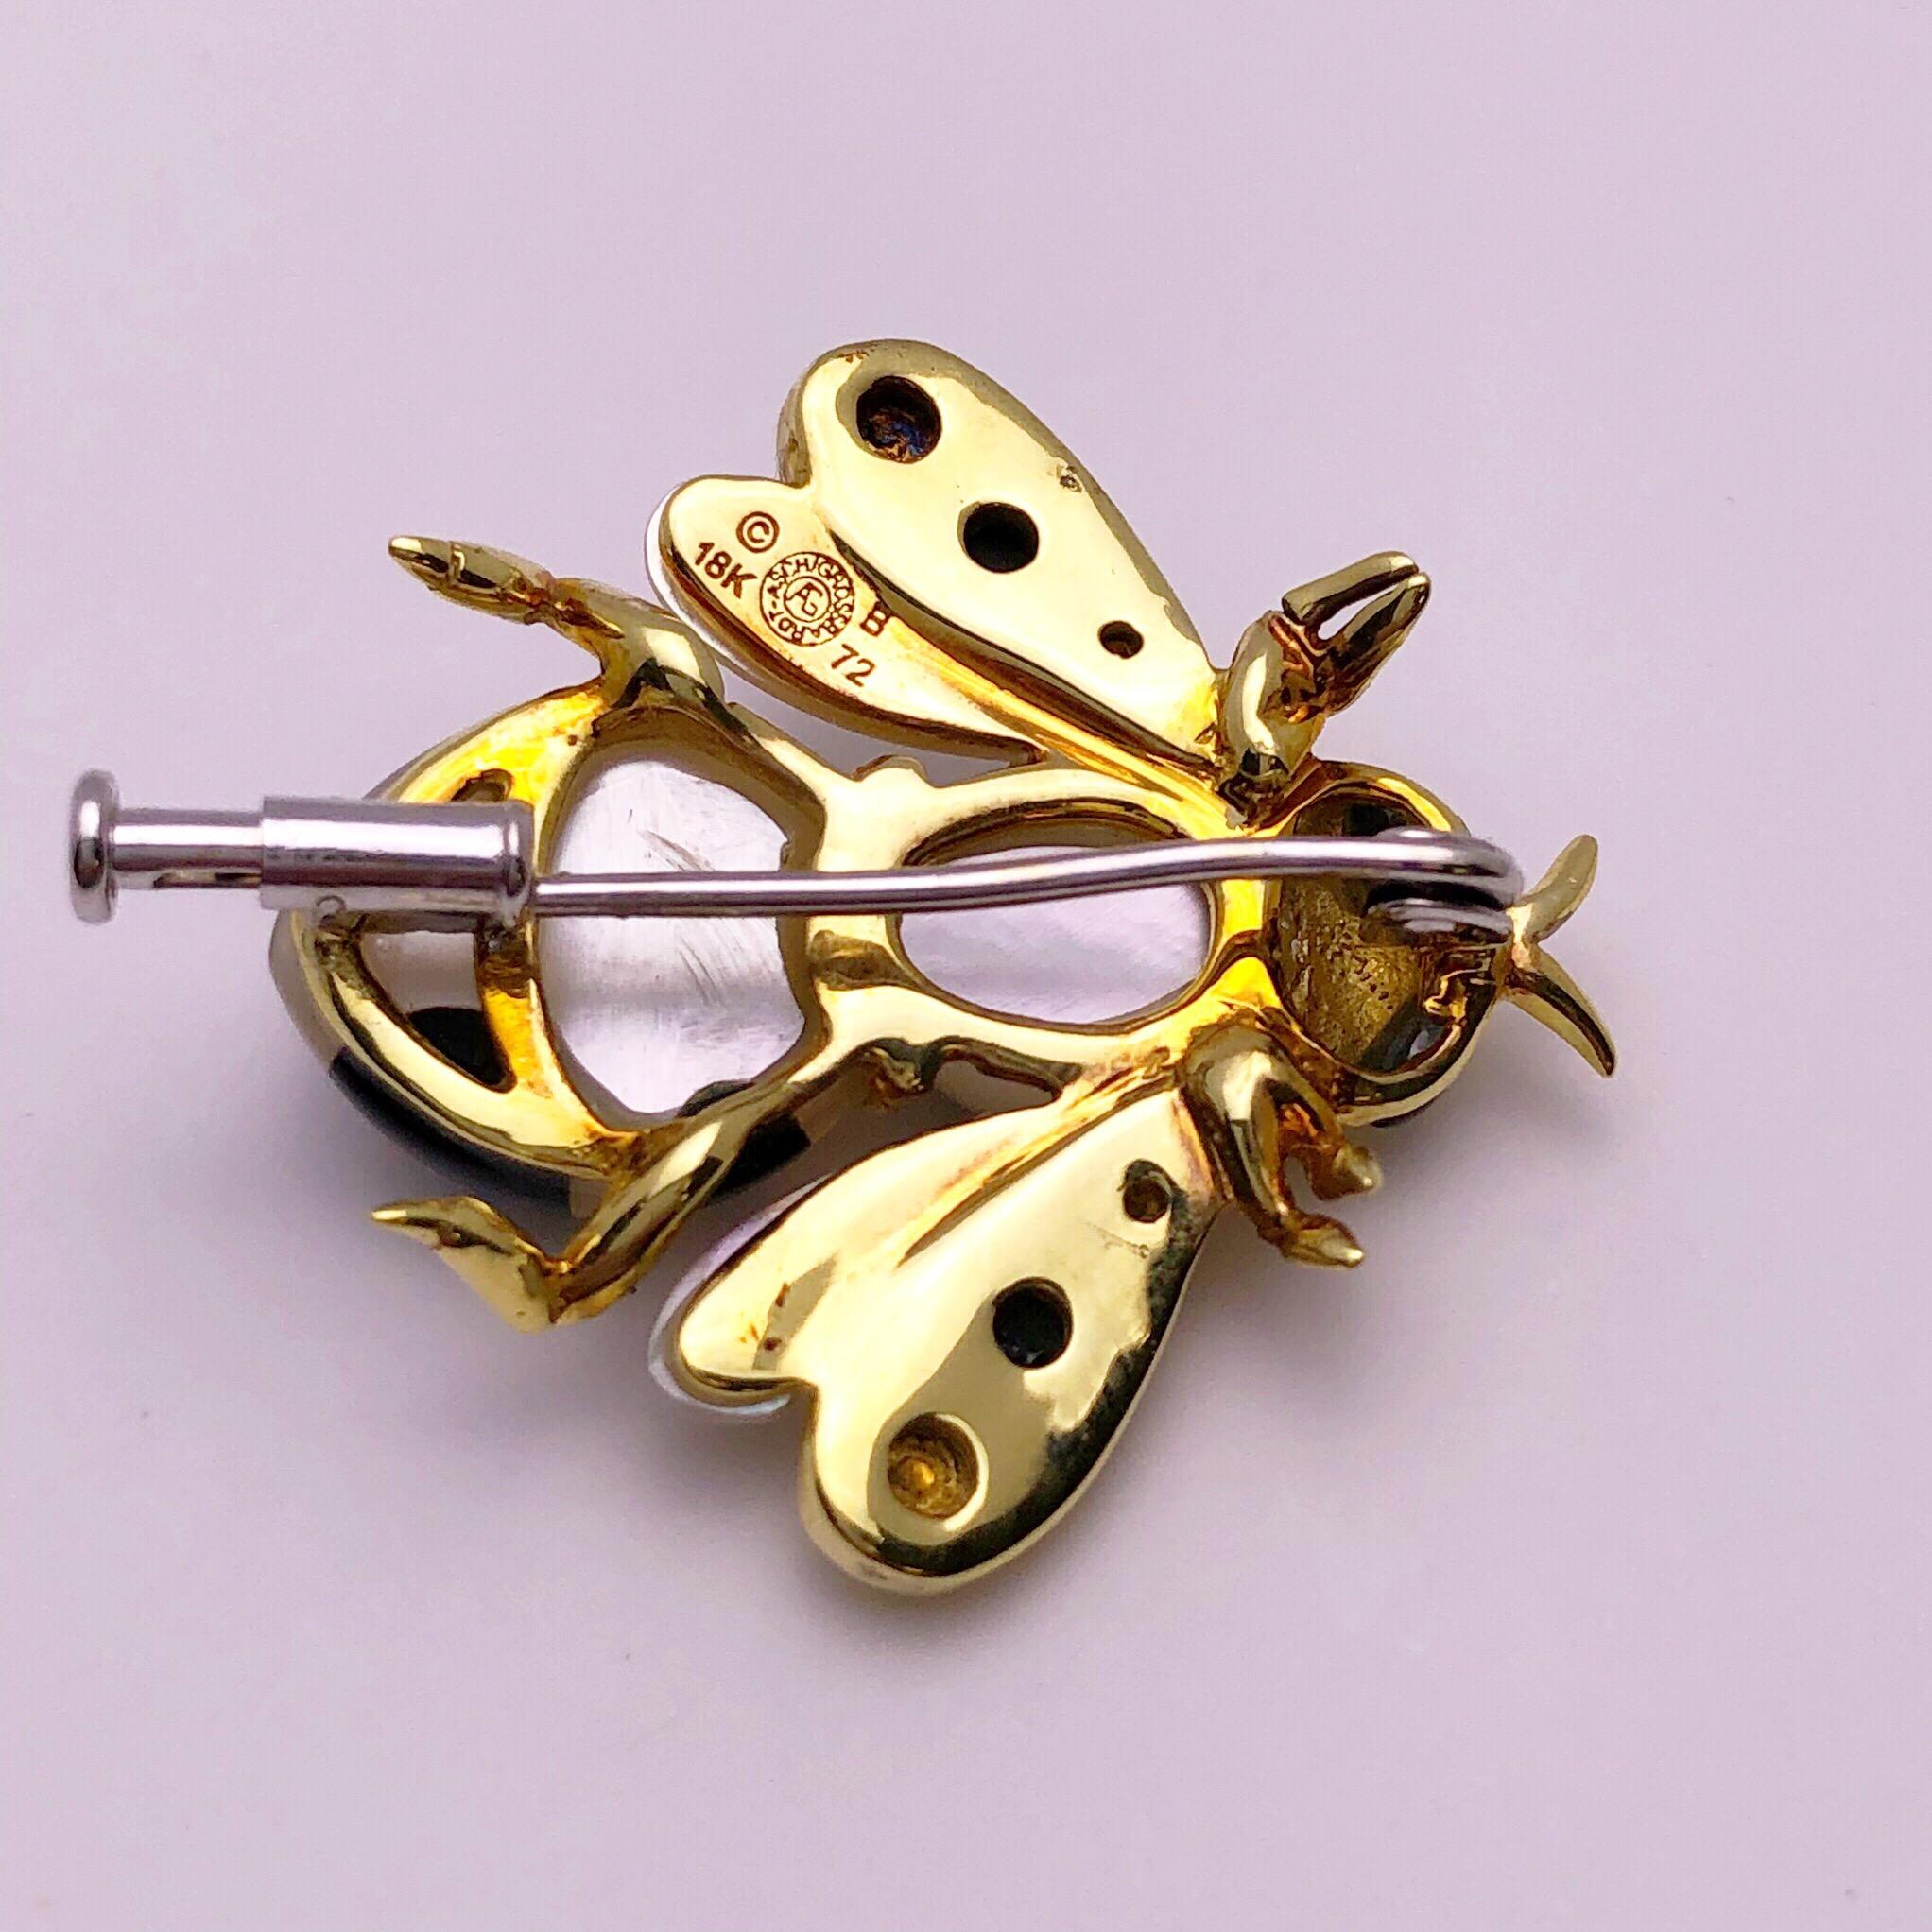 This lovely bee brooch would look perfect on a lapel or a classic dress. Designed by Asch Grossbardt, the bee is a high polished 18 kt yellow gold set with white mother of pearl and black onyx. She measures 1